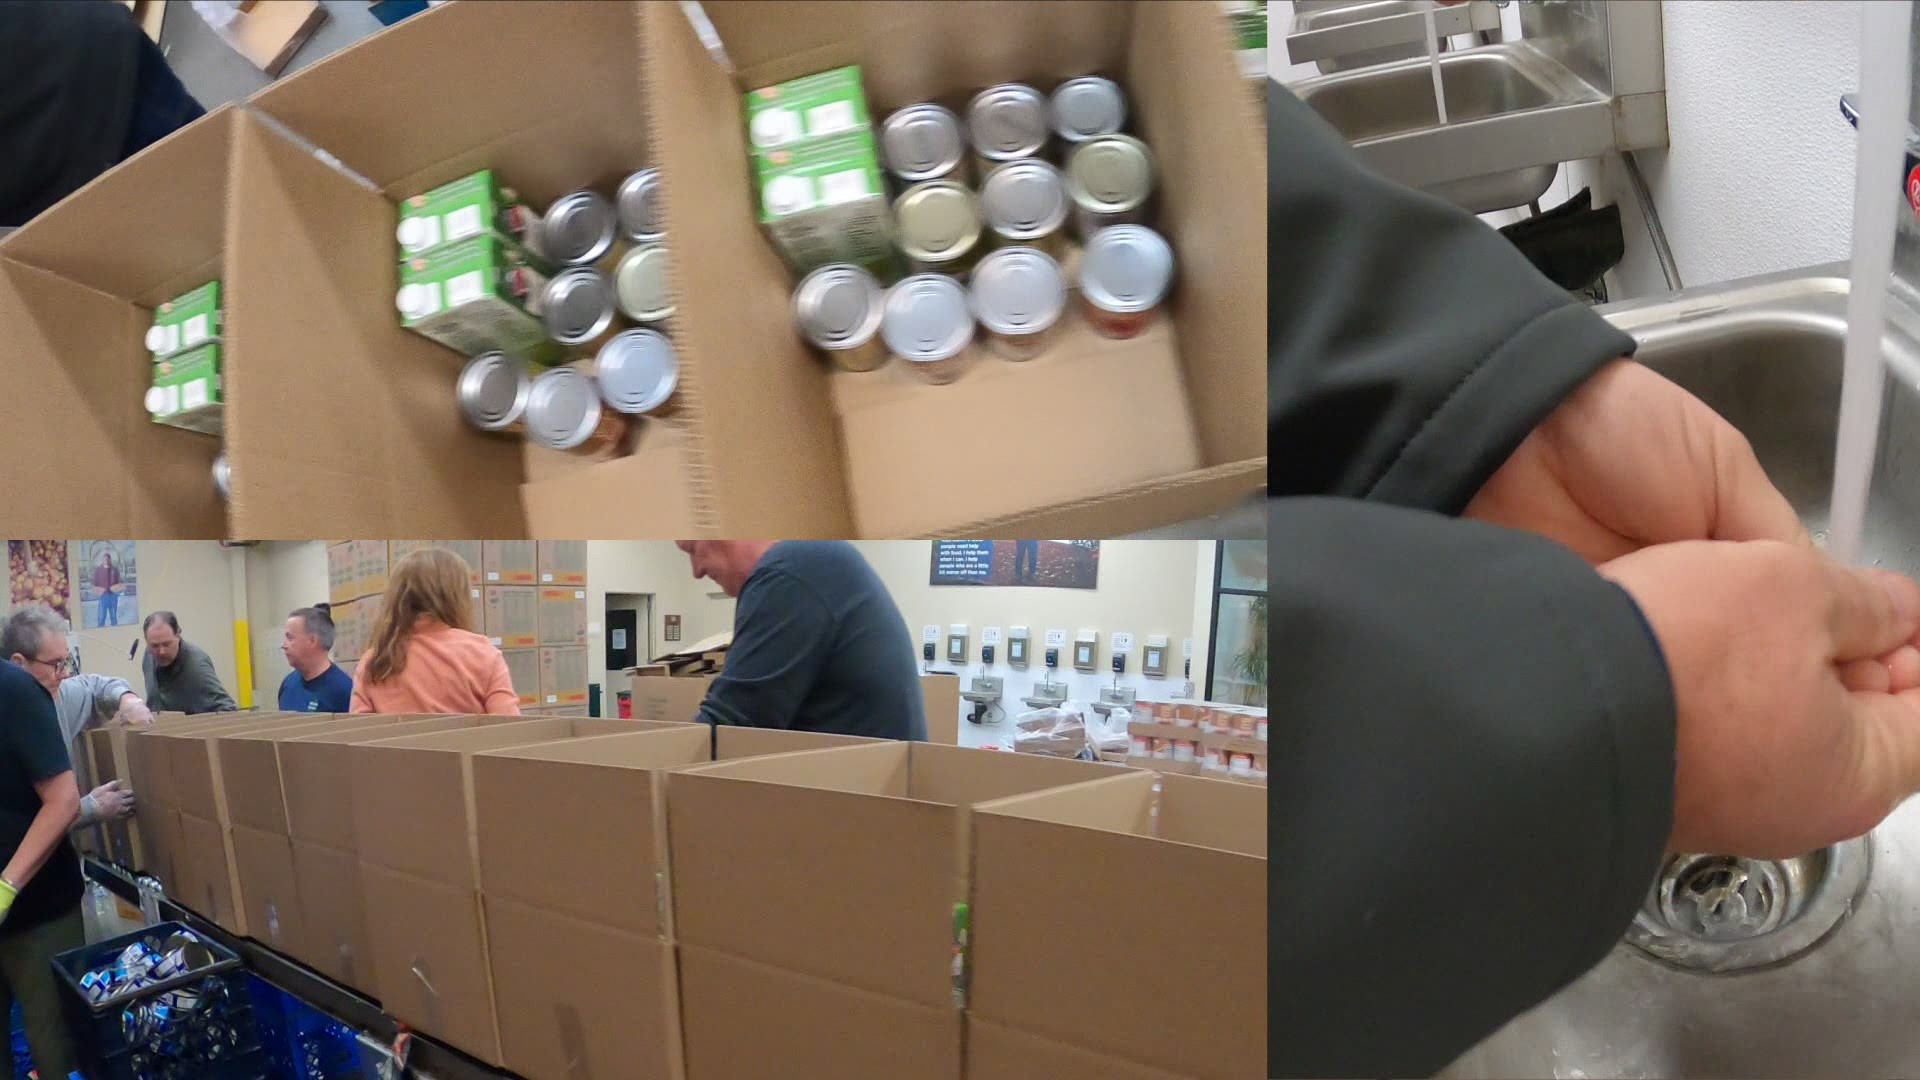 KGW meteorologist Rod Hill visited the Oregon Food Bank for a day of volunteering at the warehouse. The KGW Great Food drive runs through April 1st.